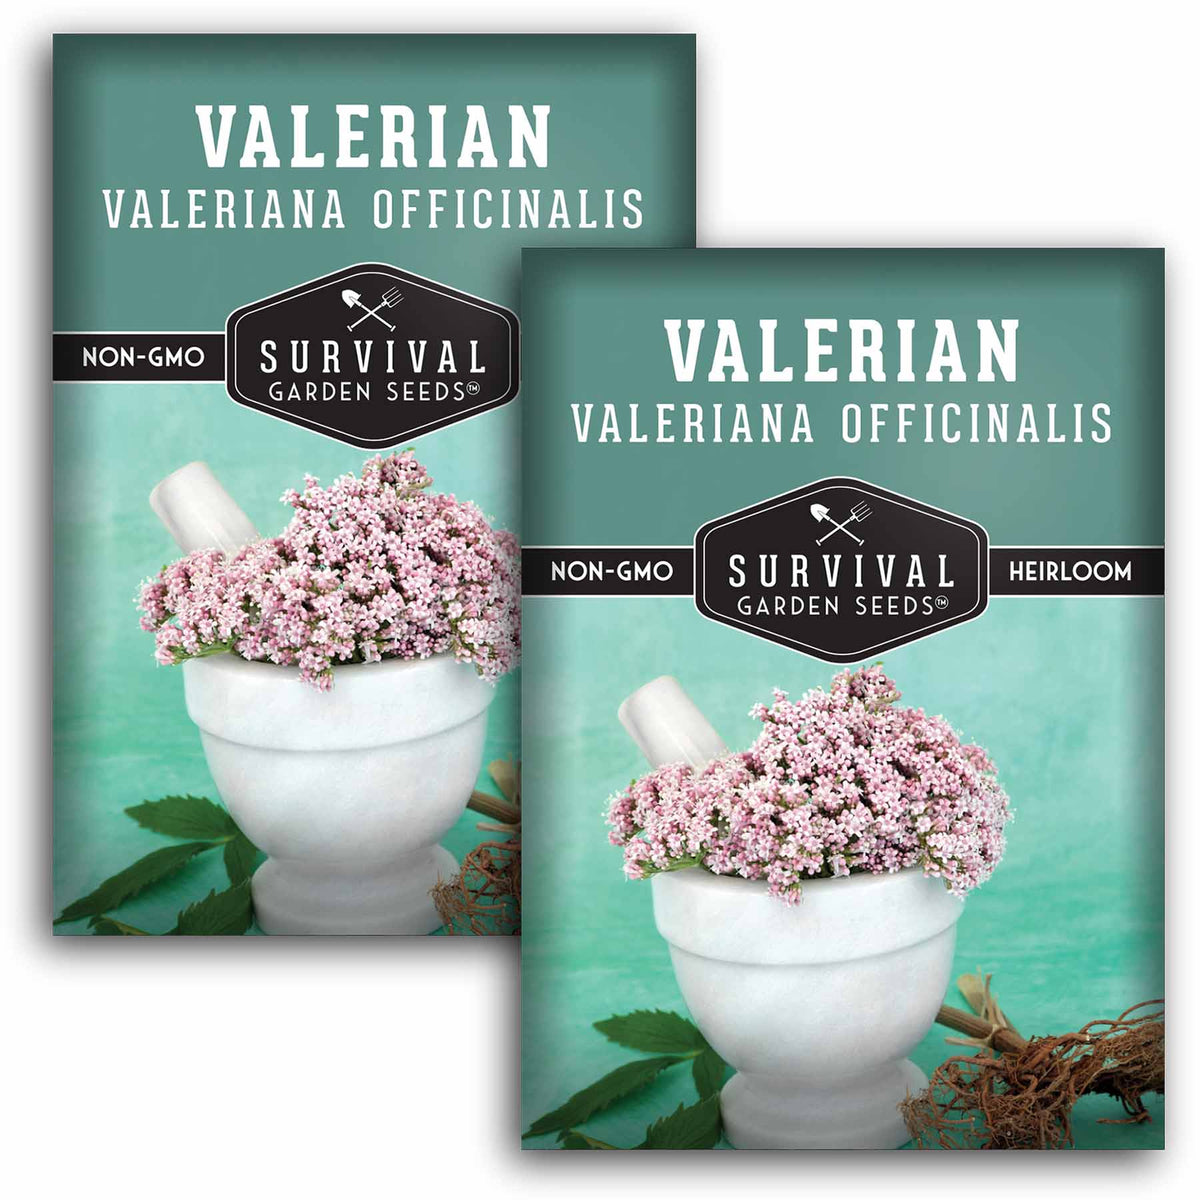 2 packets of Valerian seeds